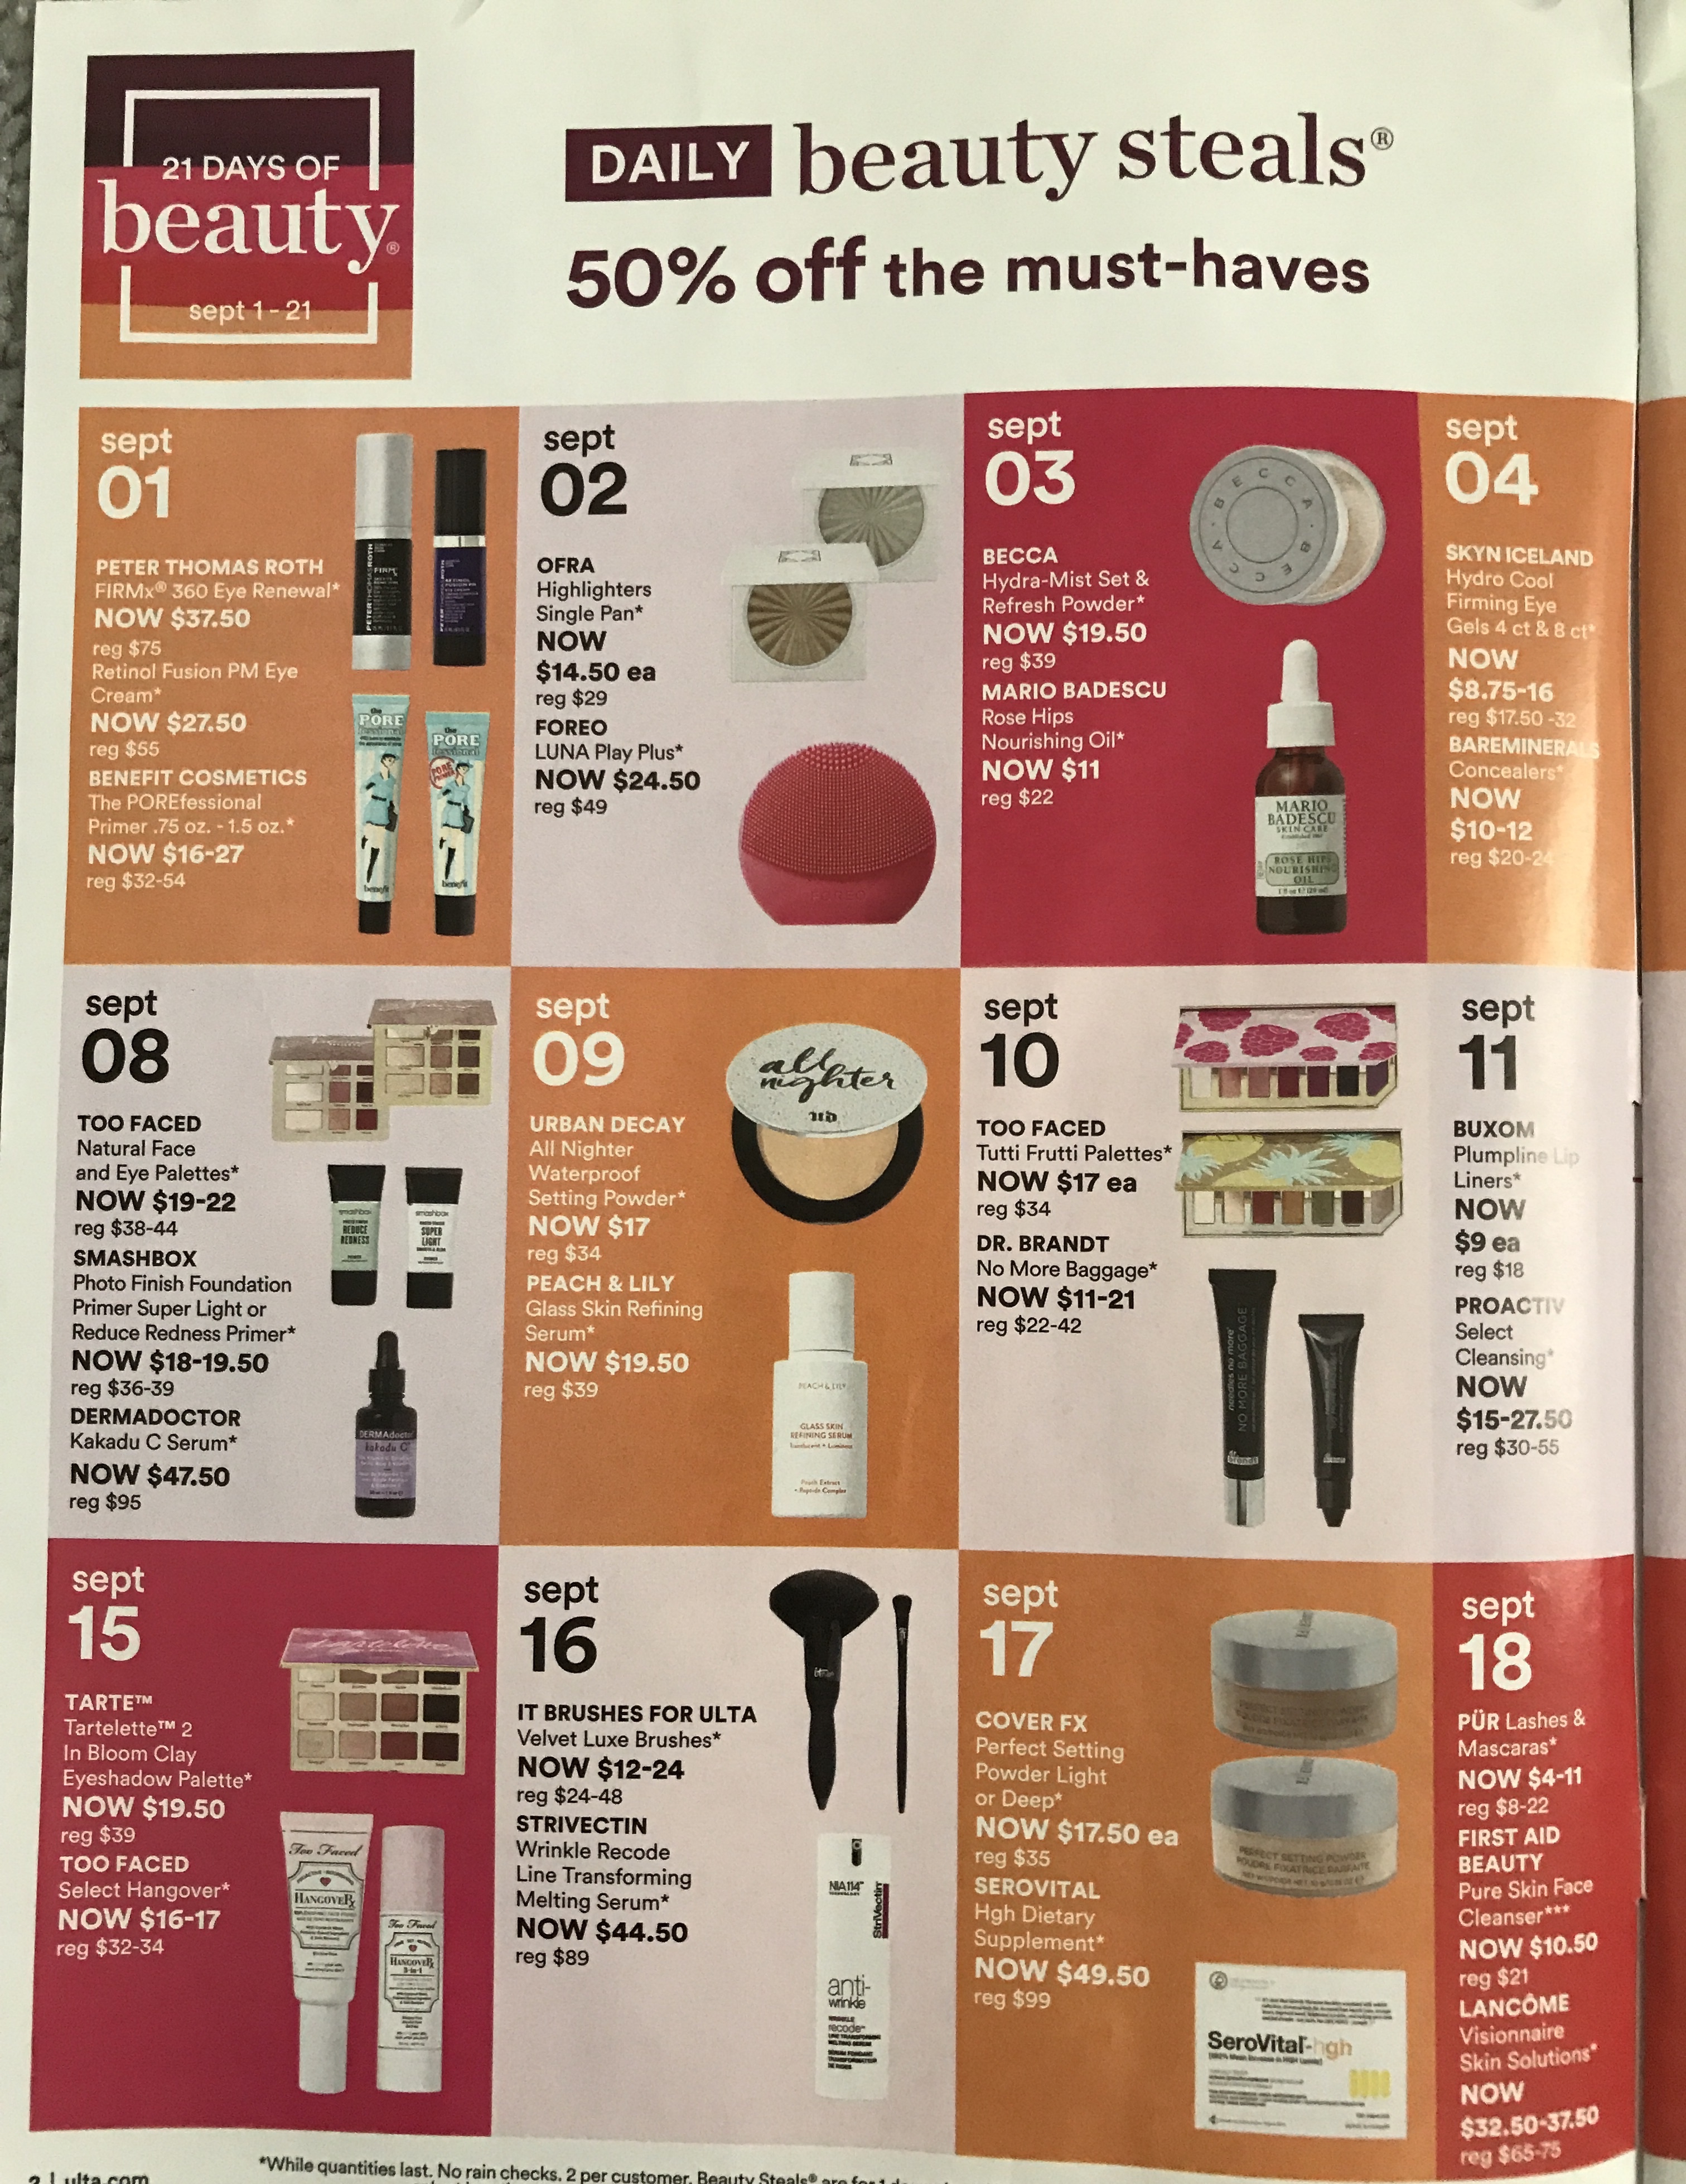 lost of sale items on each calendar day from Sept 1-21 for Ulta 21 Days of Beauty - left hand side of the catalogue